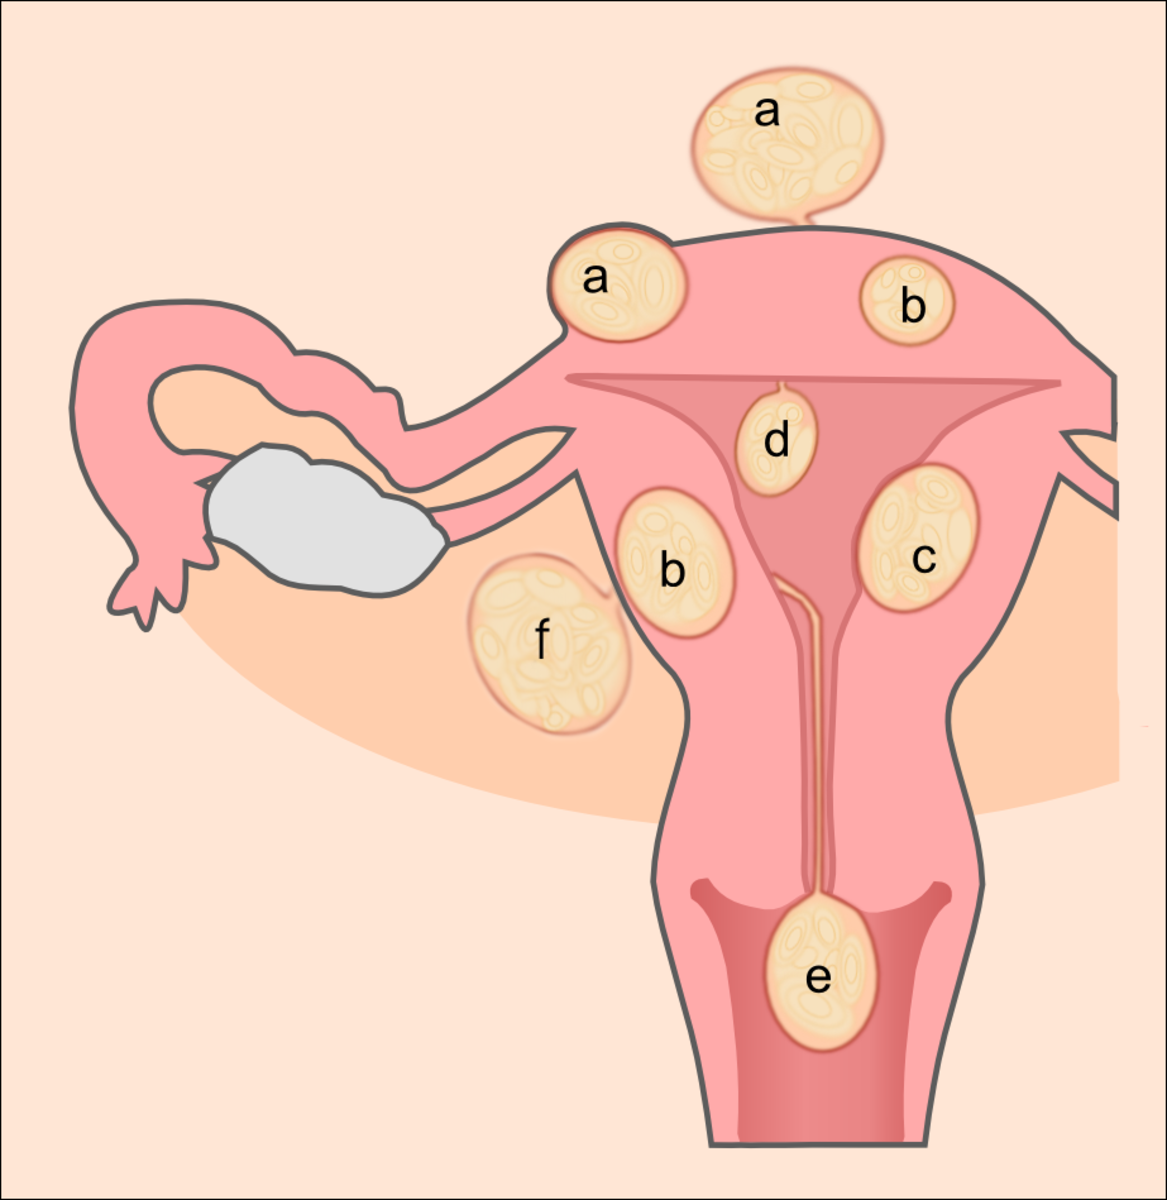 Schematic Showing the Placement of Six Types Uterine Fibroids Within the Womb